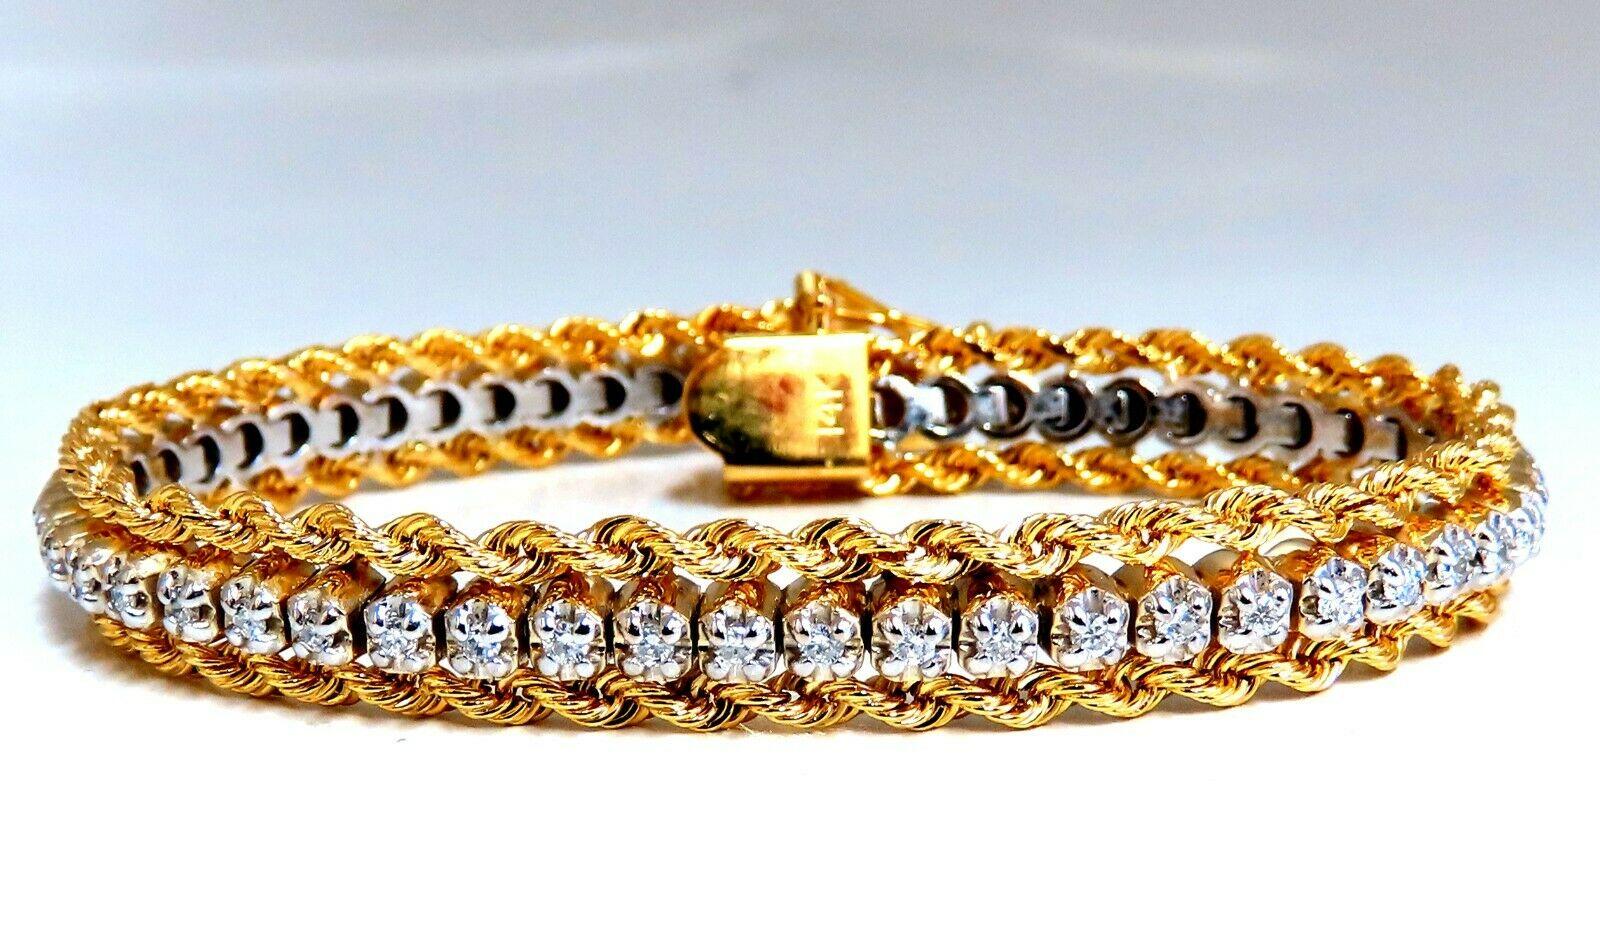 Three Tier Retro Rope Chain Bracelet


1.01ct. natural diamonds.
Rounds, Full cut brilliants

G colors Vs-2 clarity.

14kt. yellow gold

24.6 Grams.

7 Inches long (wearable length)

8.7mm wide

Appraisal to accompany $8000